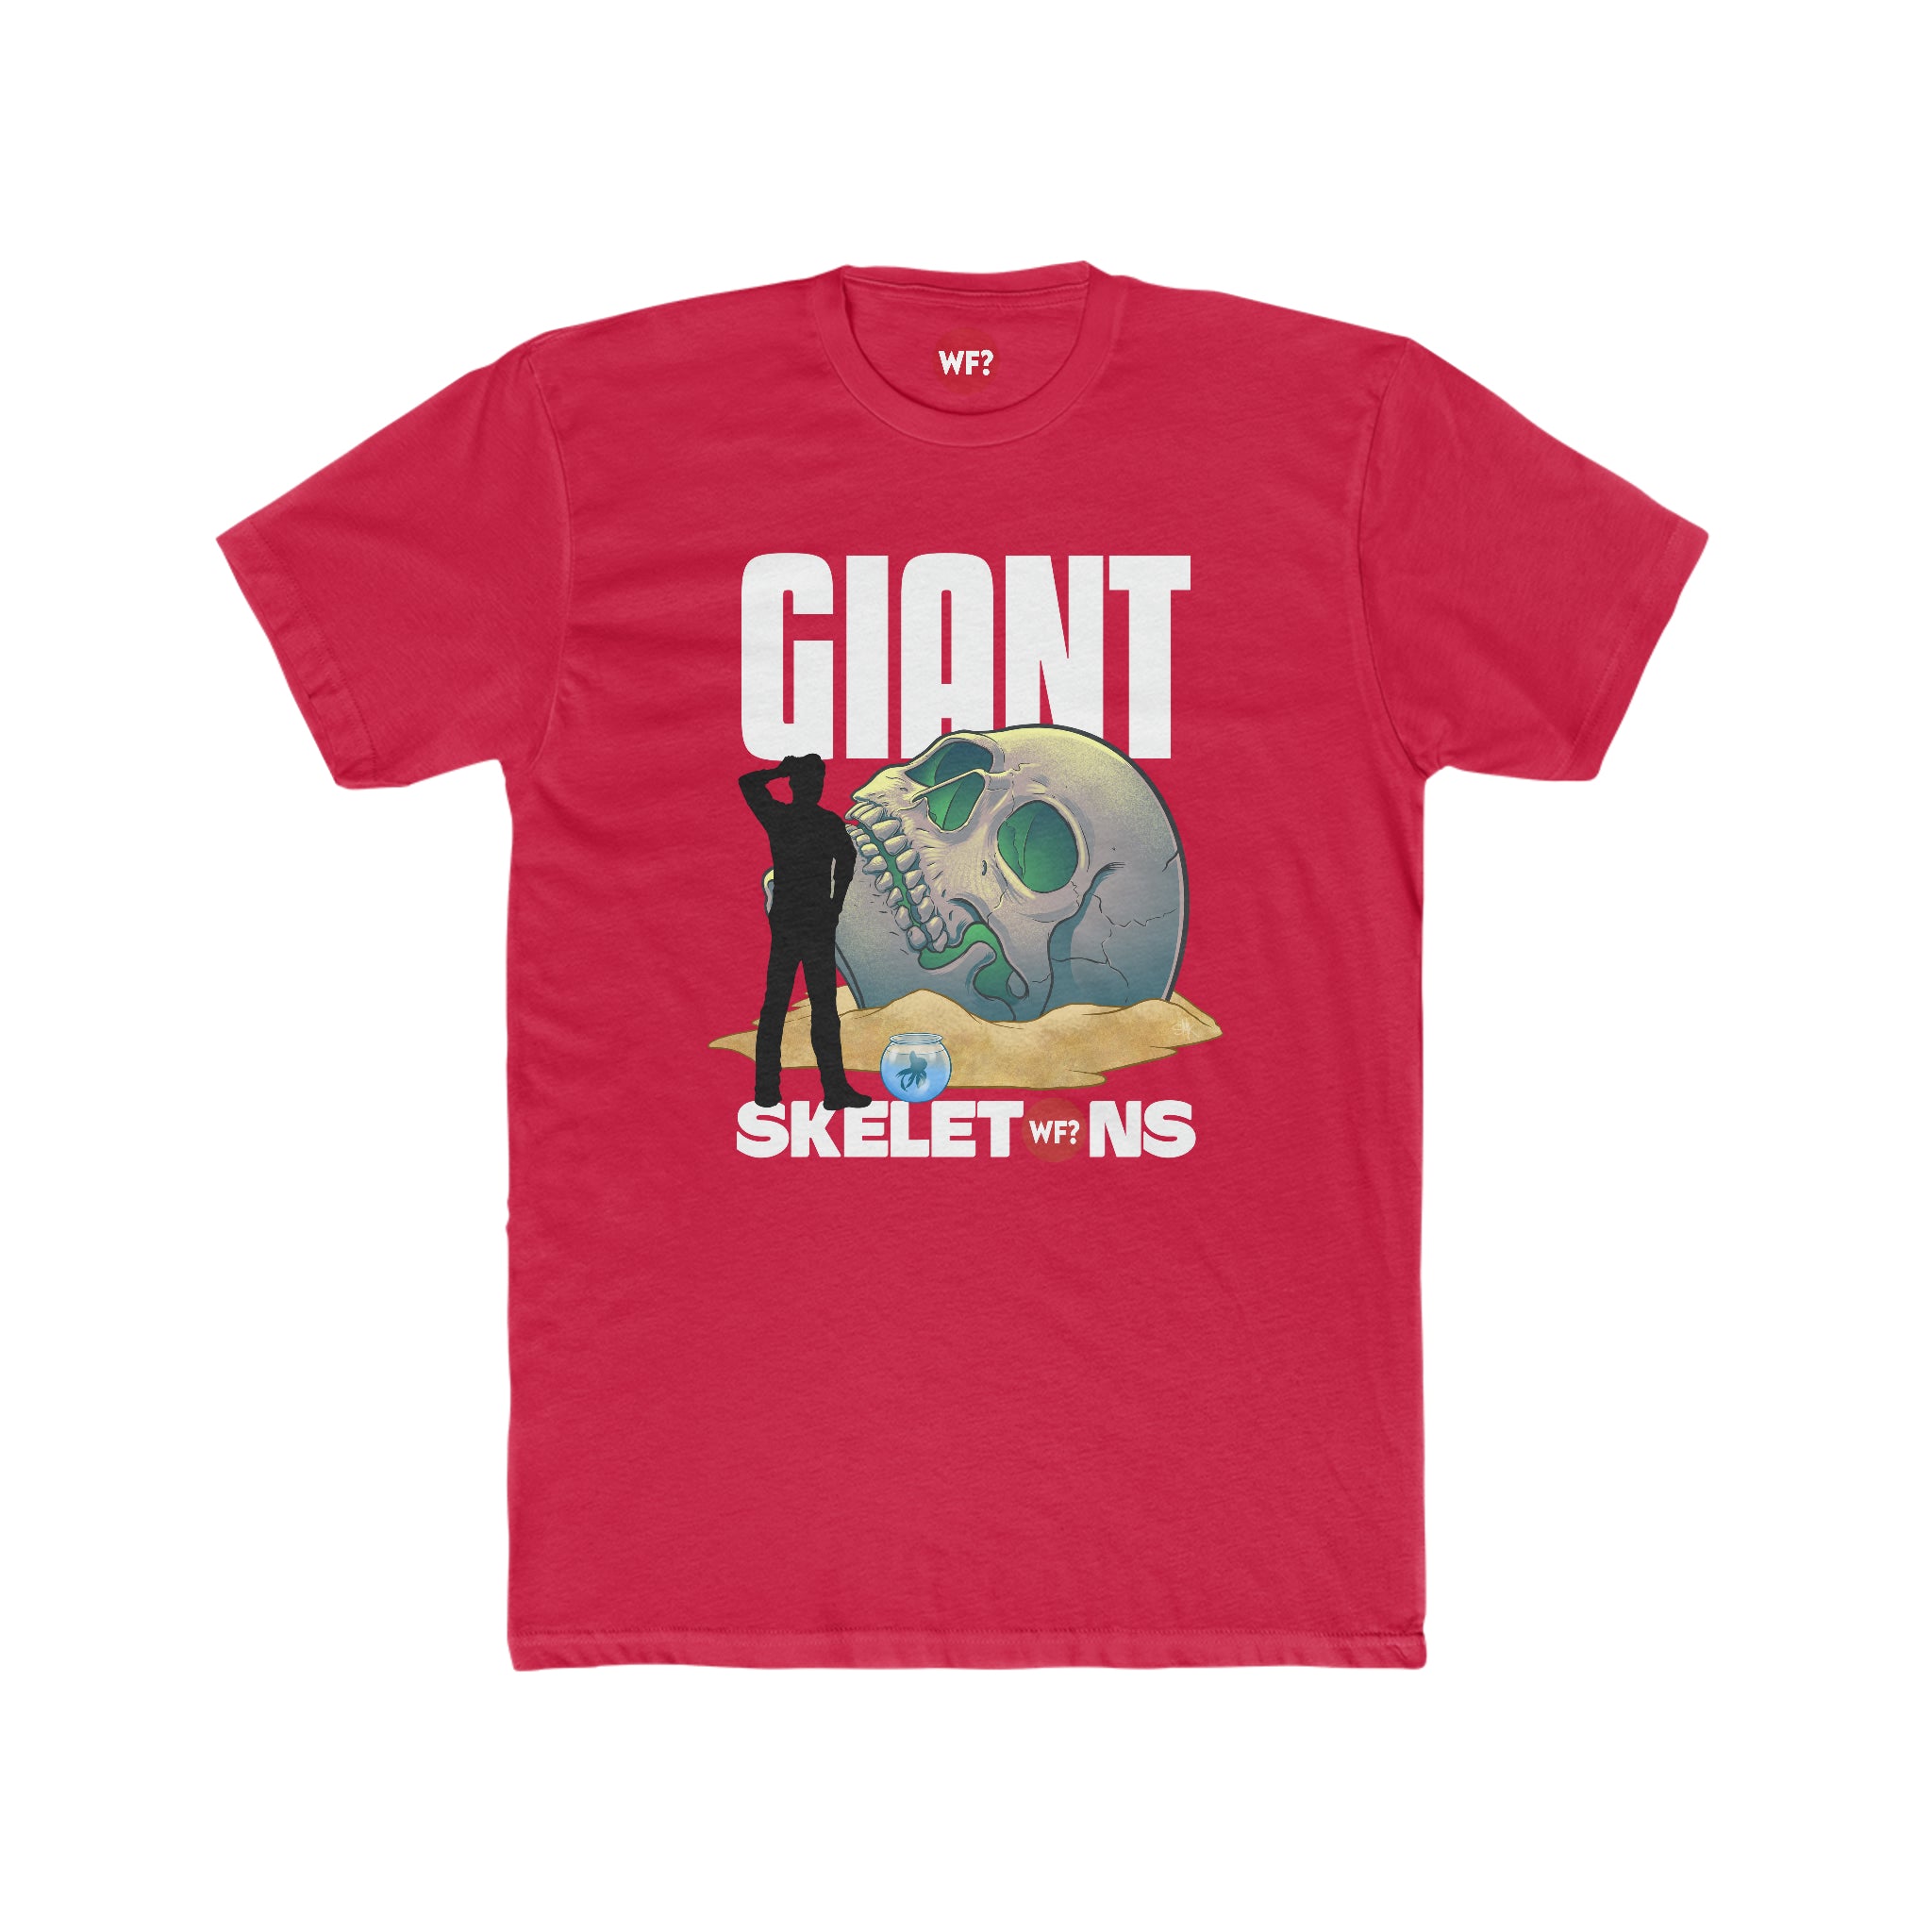 Buy solid-red Giants Limited T-Shirt